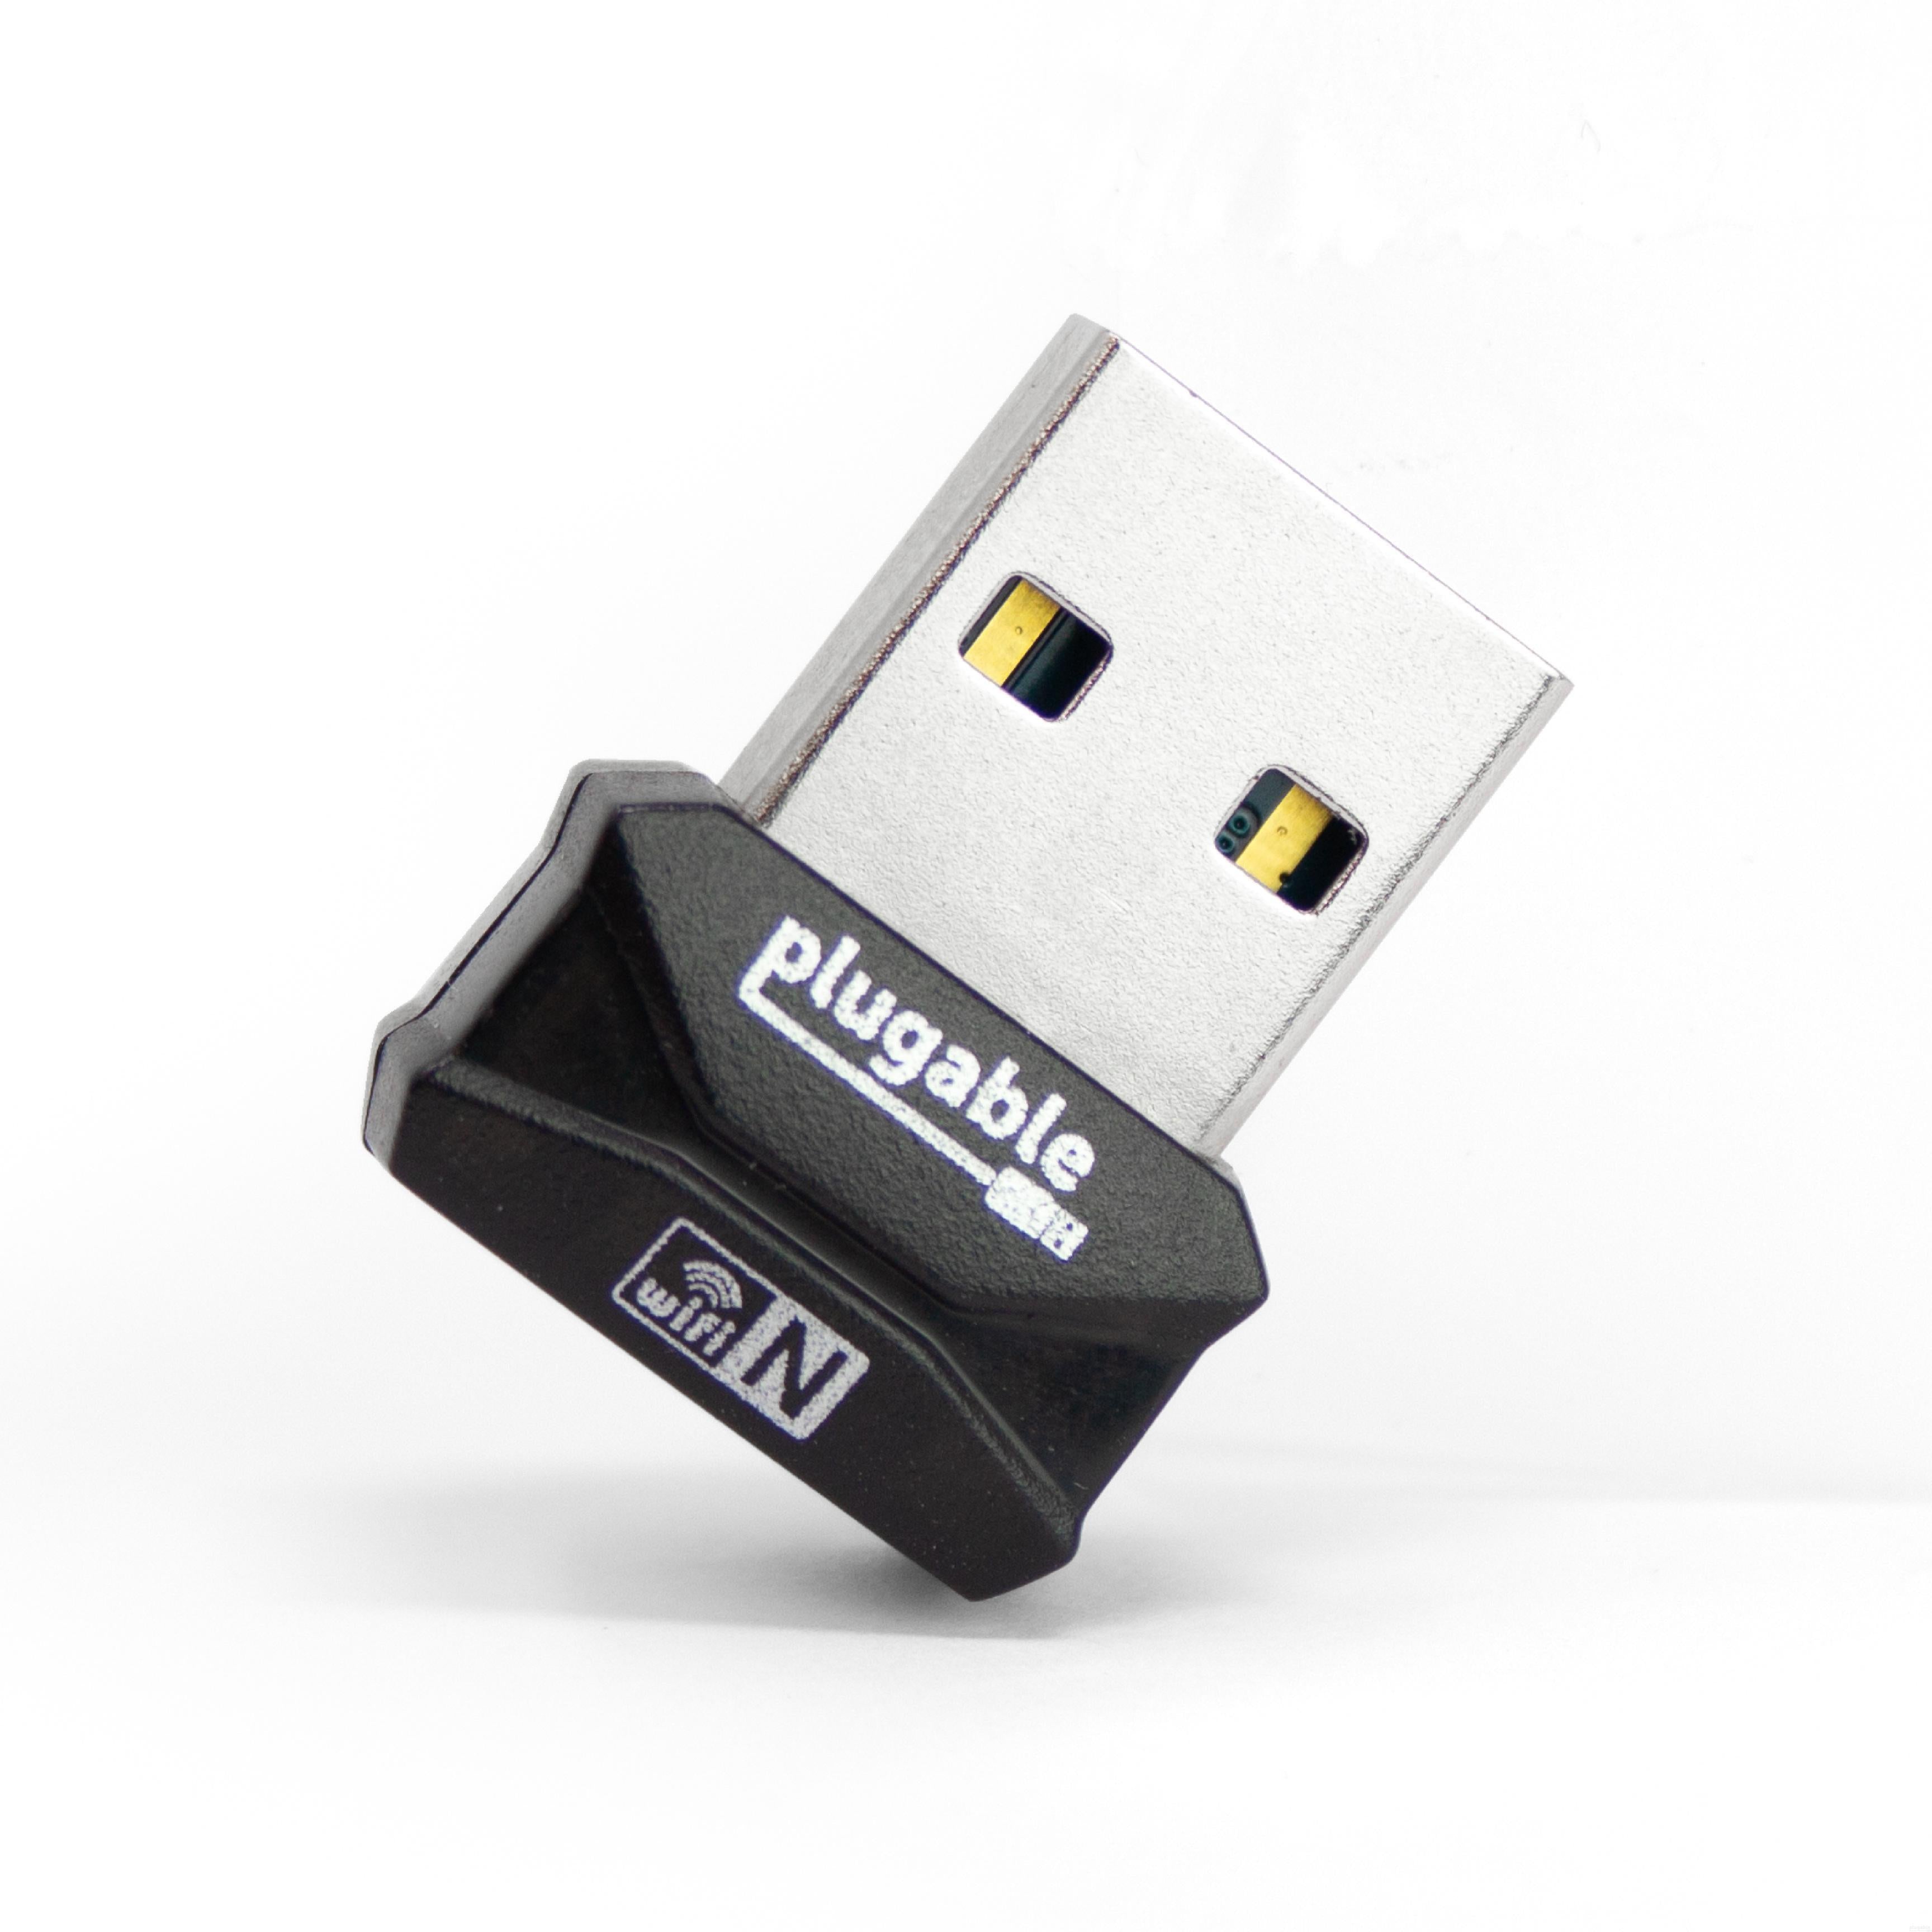 ethical Six Dictate Plugable USB 2.0 802.11n Wireless Adapter – Plugable Technologies